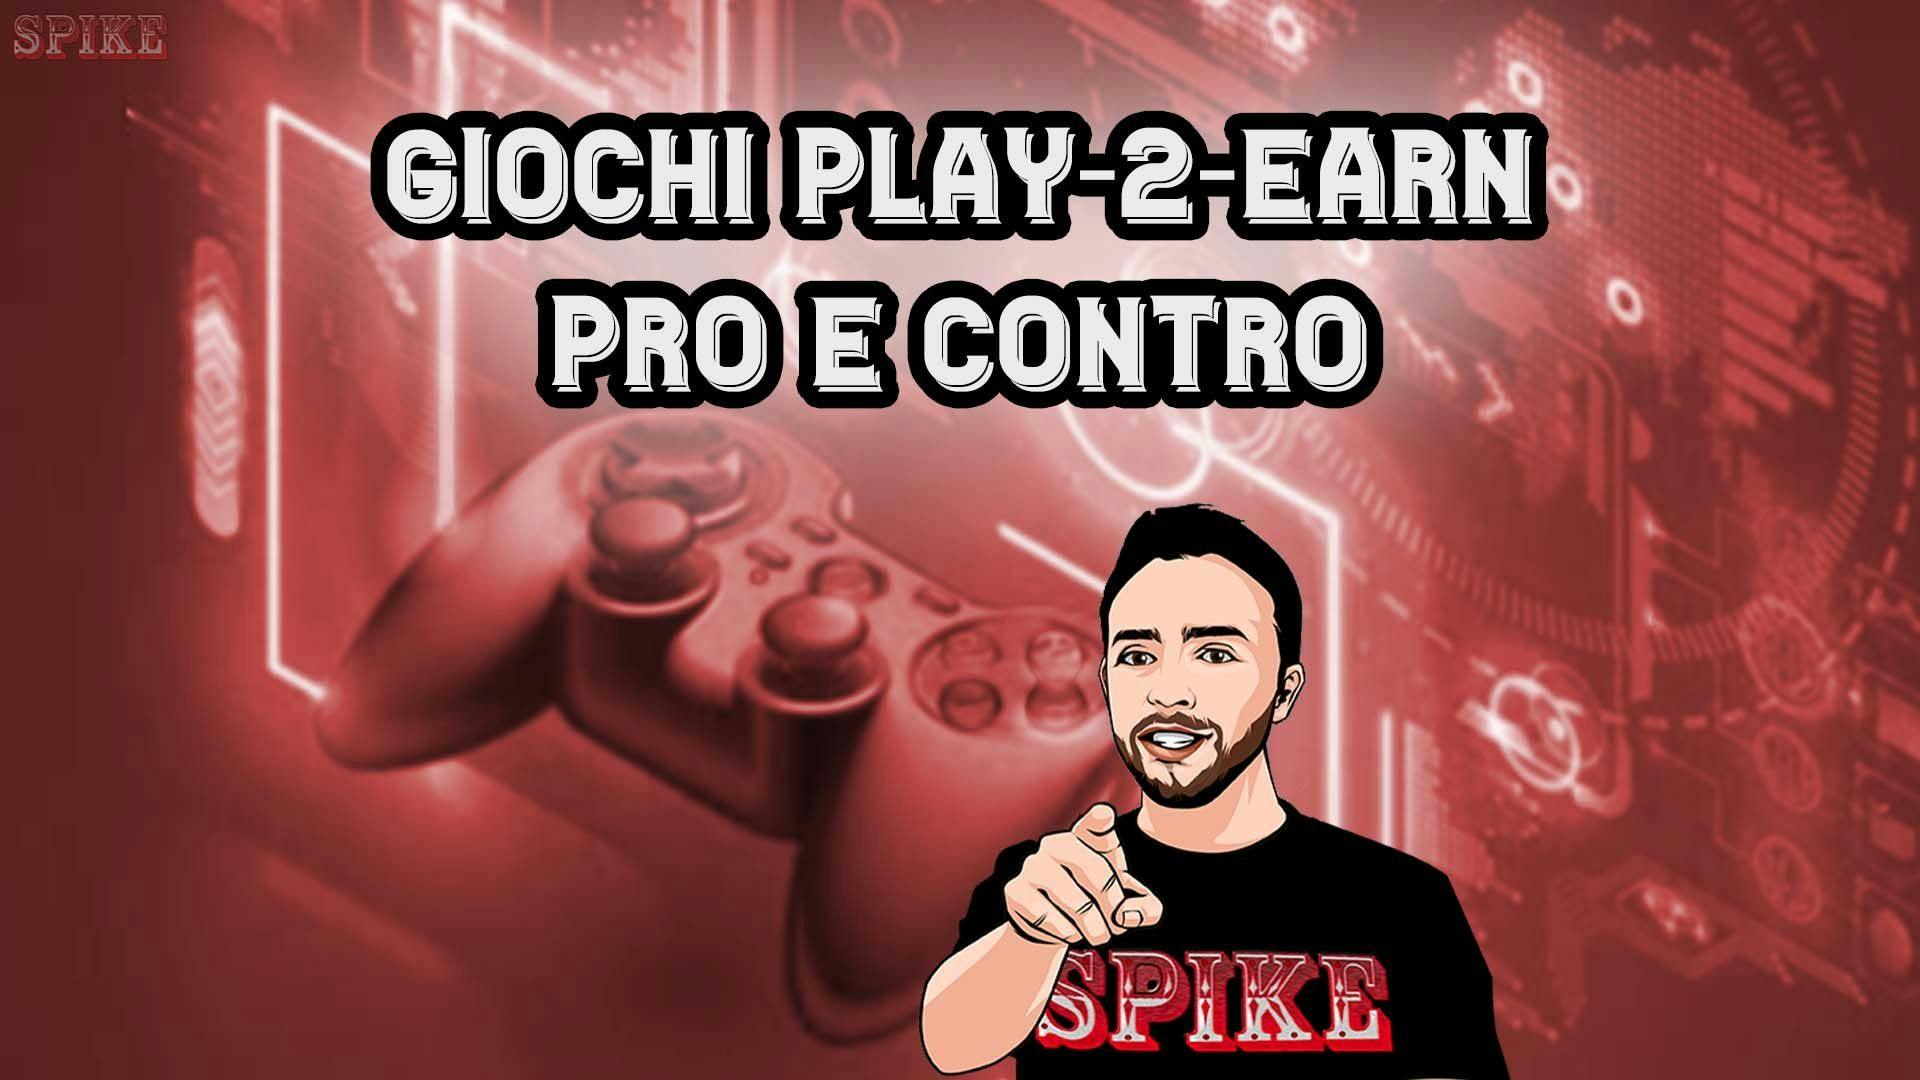 Play-To-Earn Pro Contro 